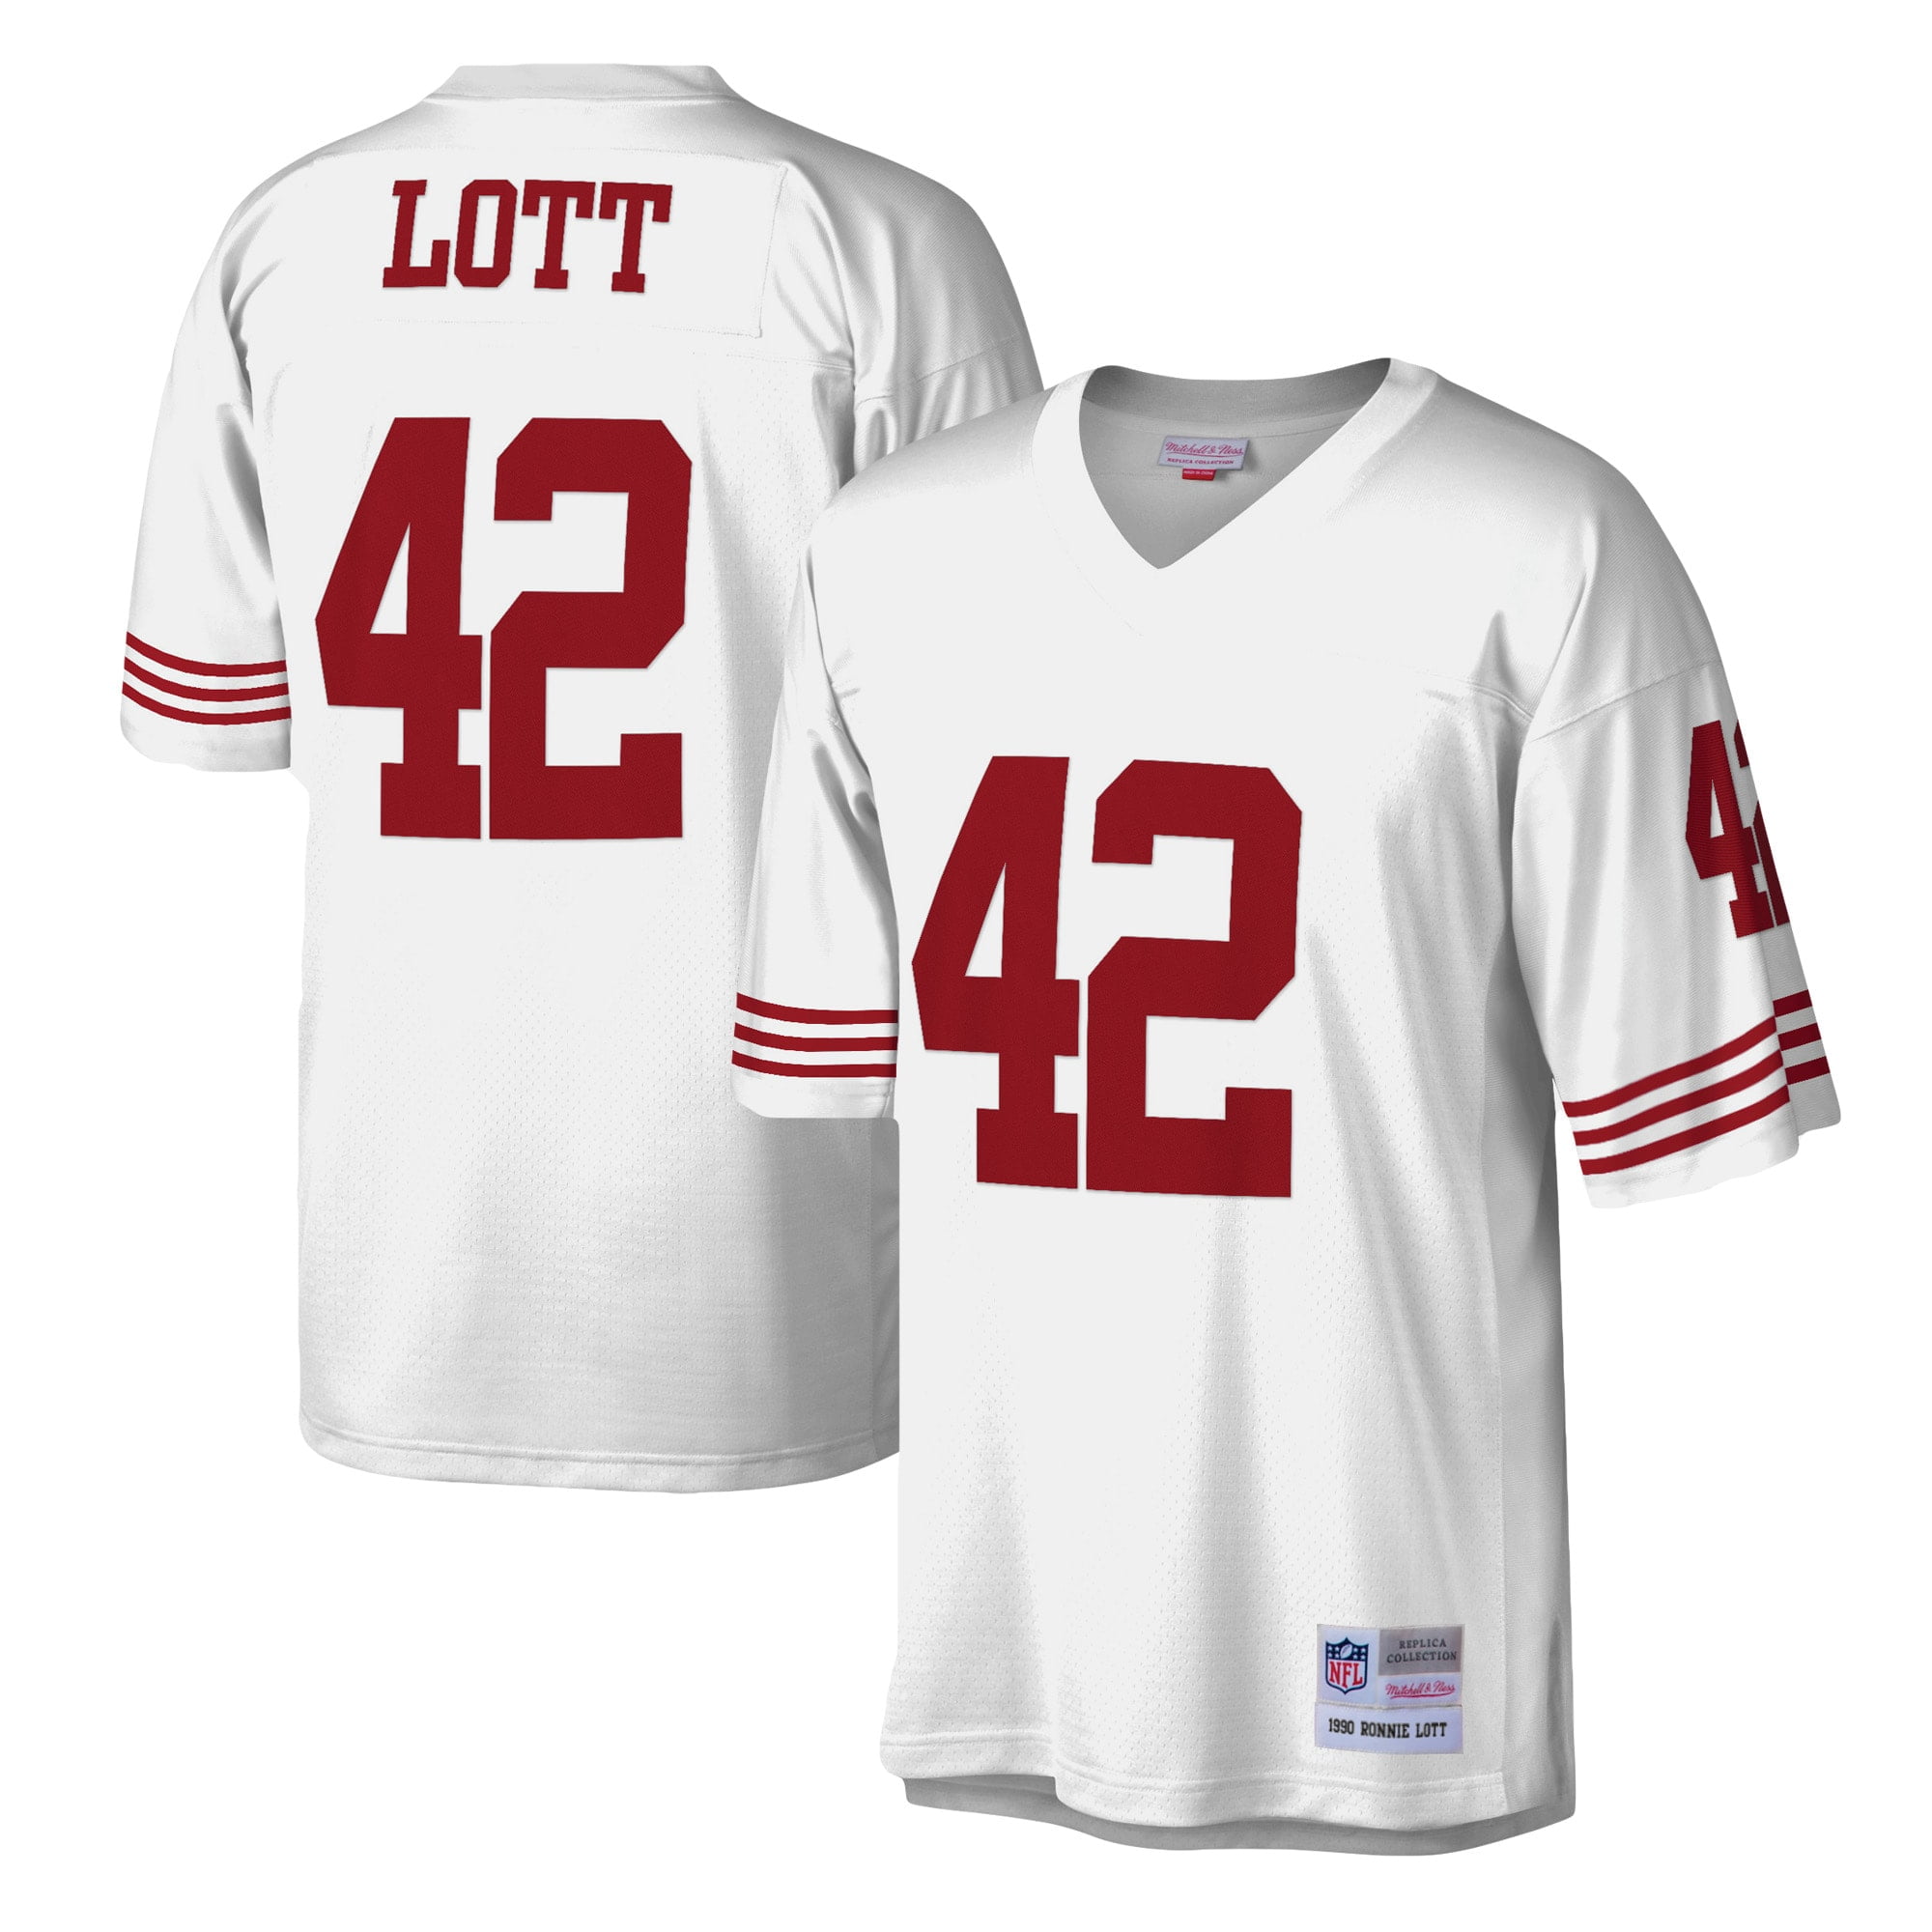 mitchell and ness ronnie lott throwback jersey